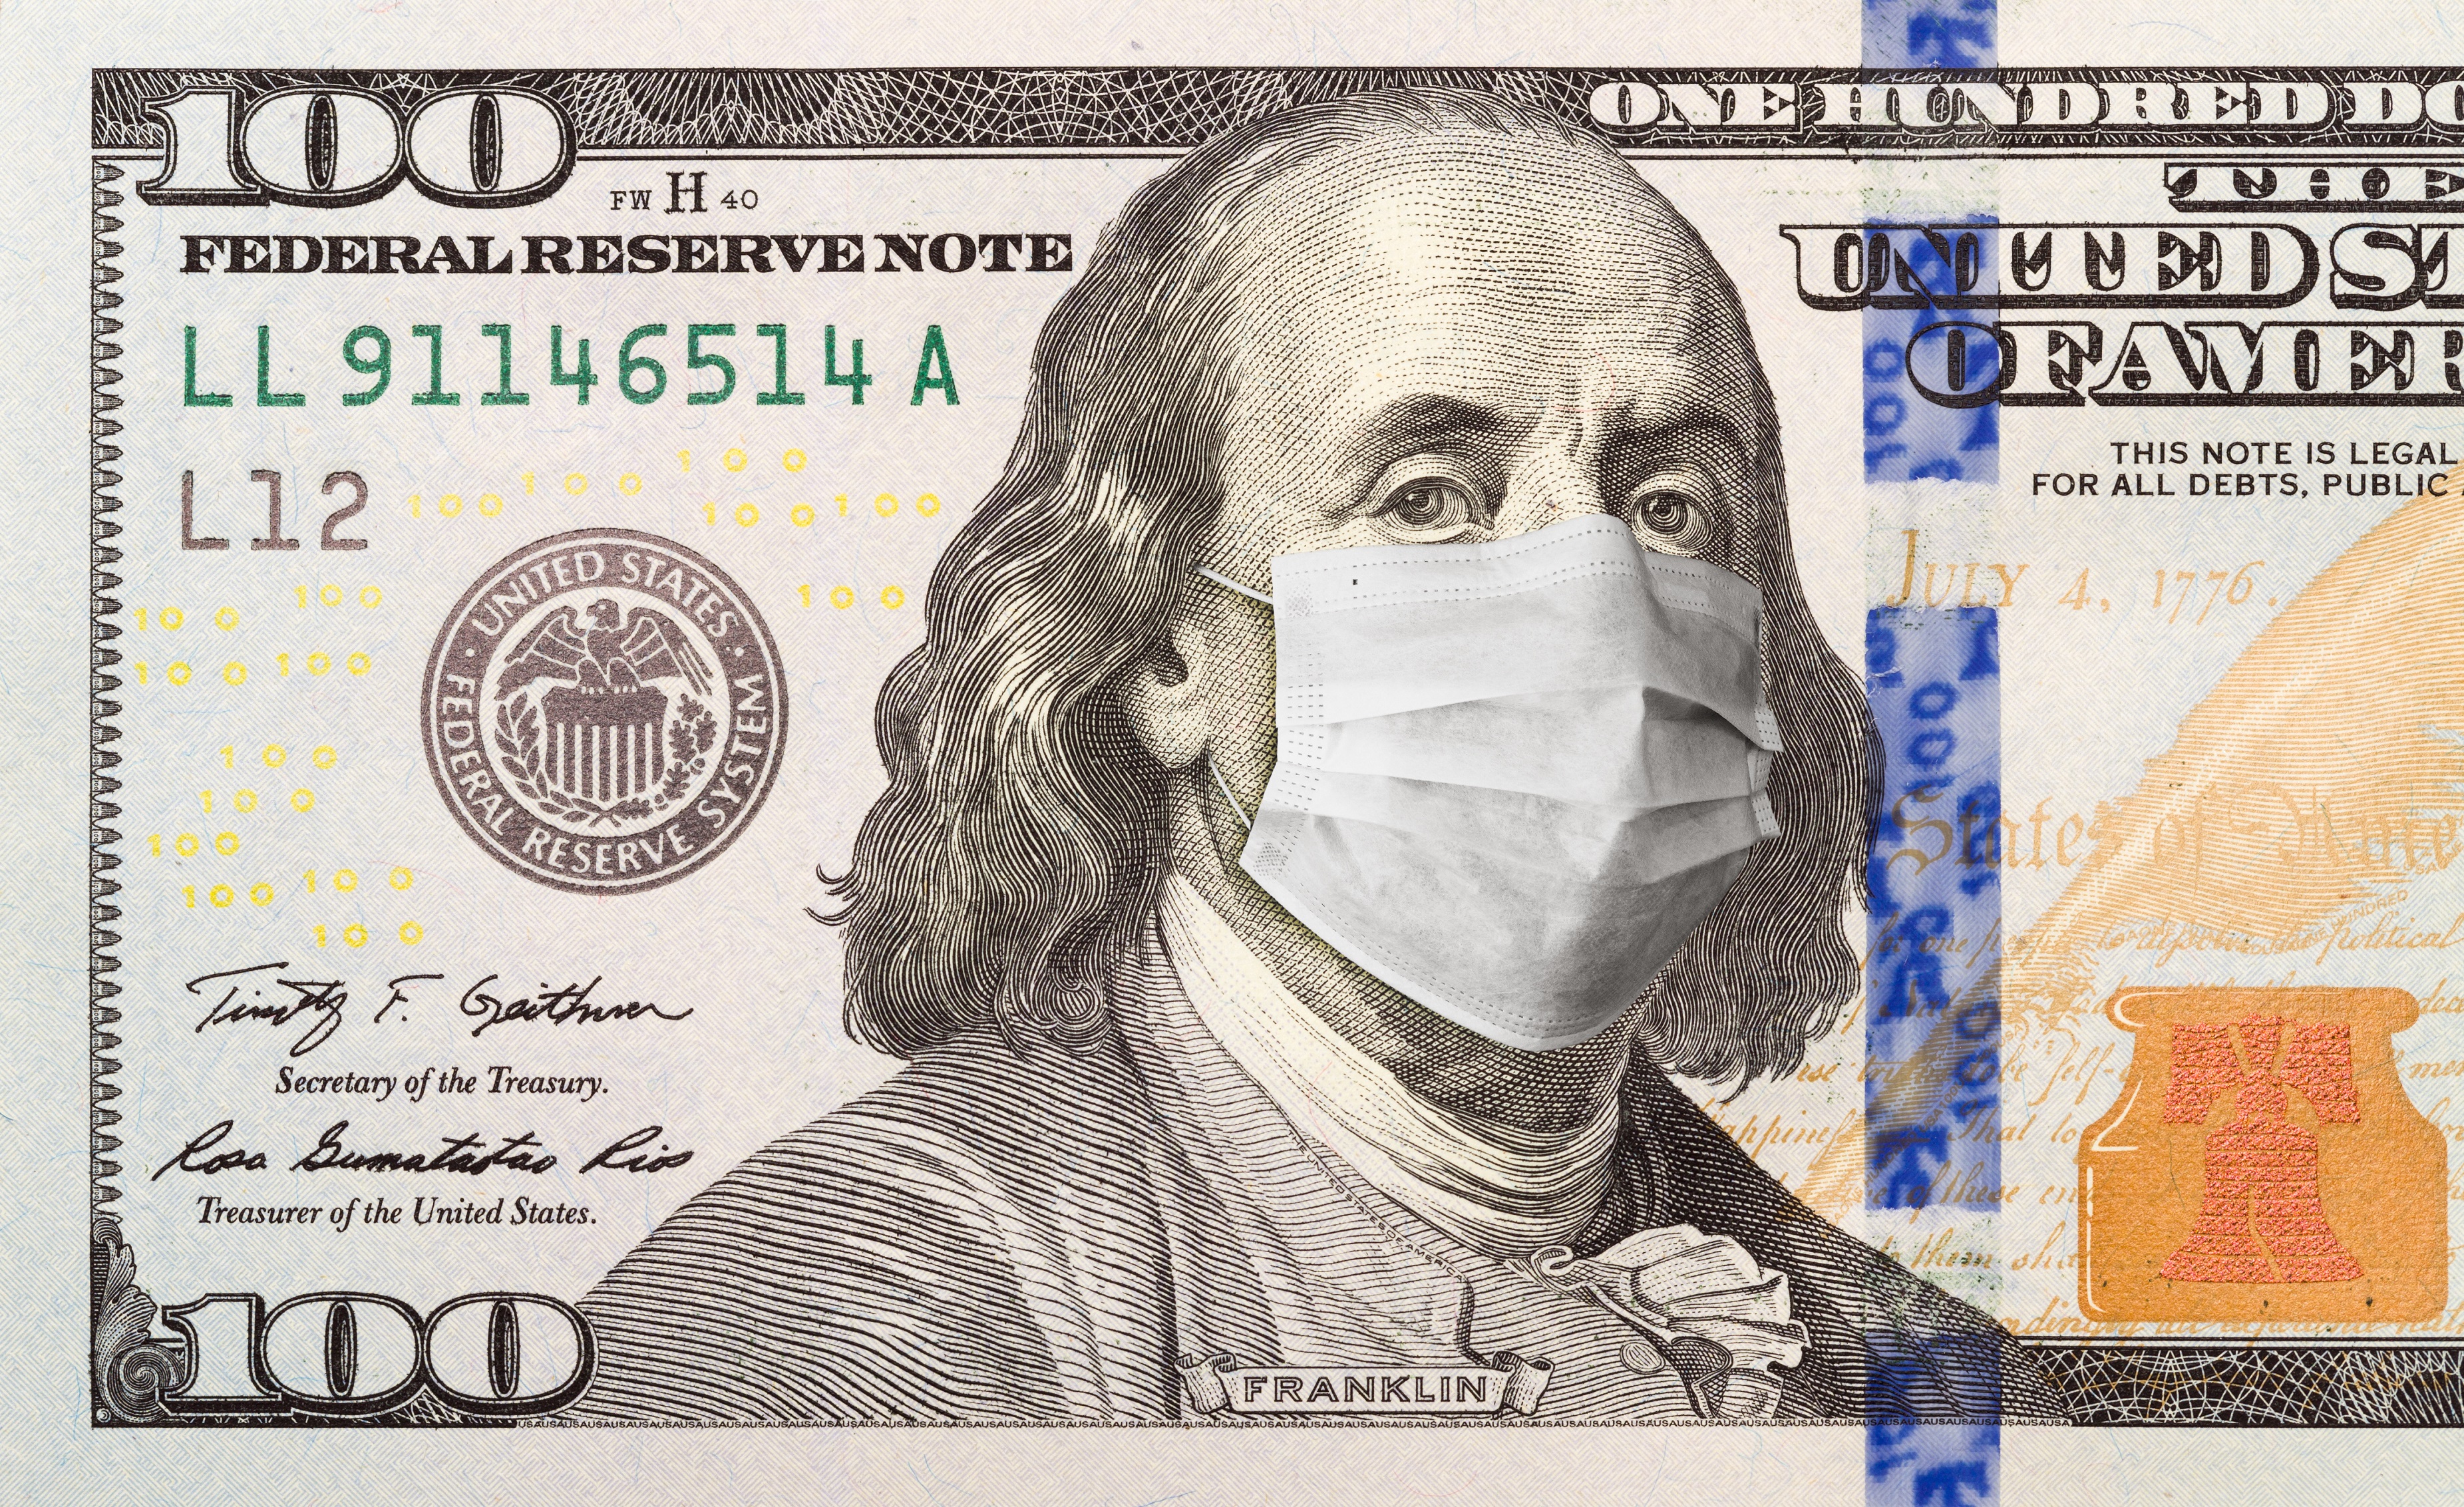 Illustration of a US $100 bill with the center portrait showing Ben Franklin wearing a surgical mask.